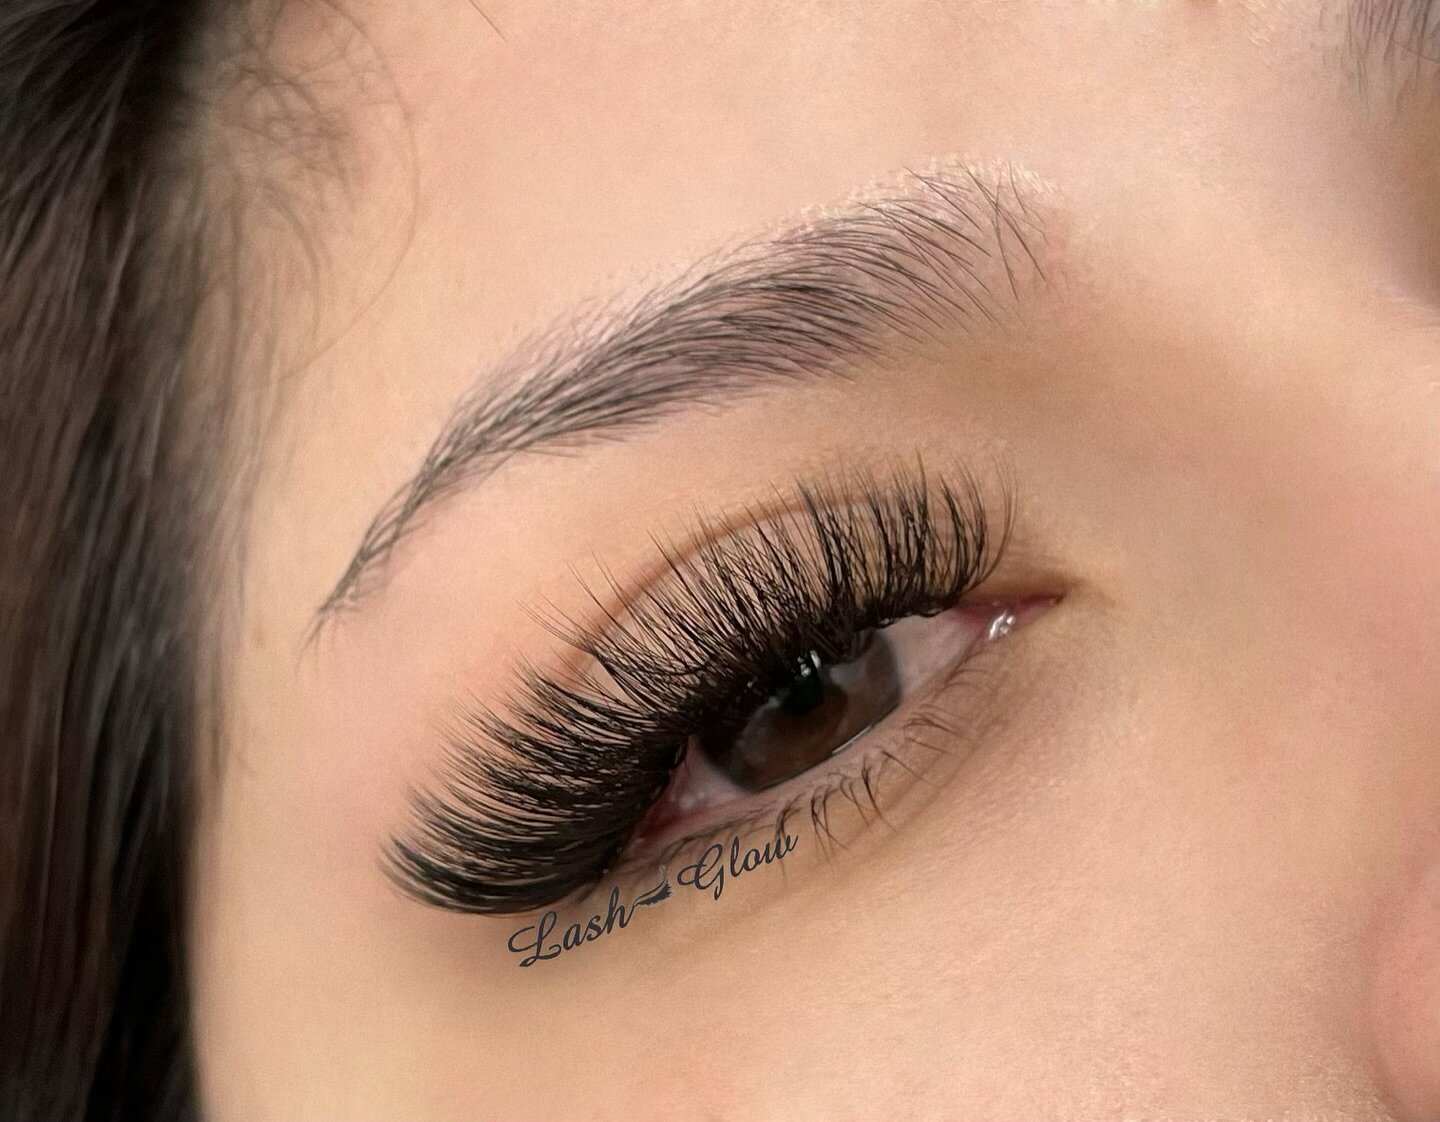 🌻Volume lashes
🎄Get holiday-ready lashes &ndash; book now for a glamorous Christmas look🎄

DM, text or call 📱 626-8998262 for appointment 

📍Pasadena Location 
641 N Lake Ave, Pasadena, CA91101

📍San Gabriel Location 
8808 E Las Tunas Dr, 
San 